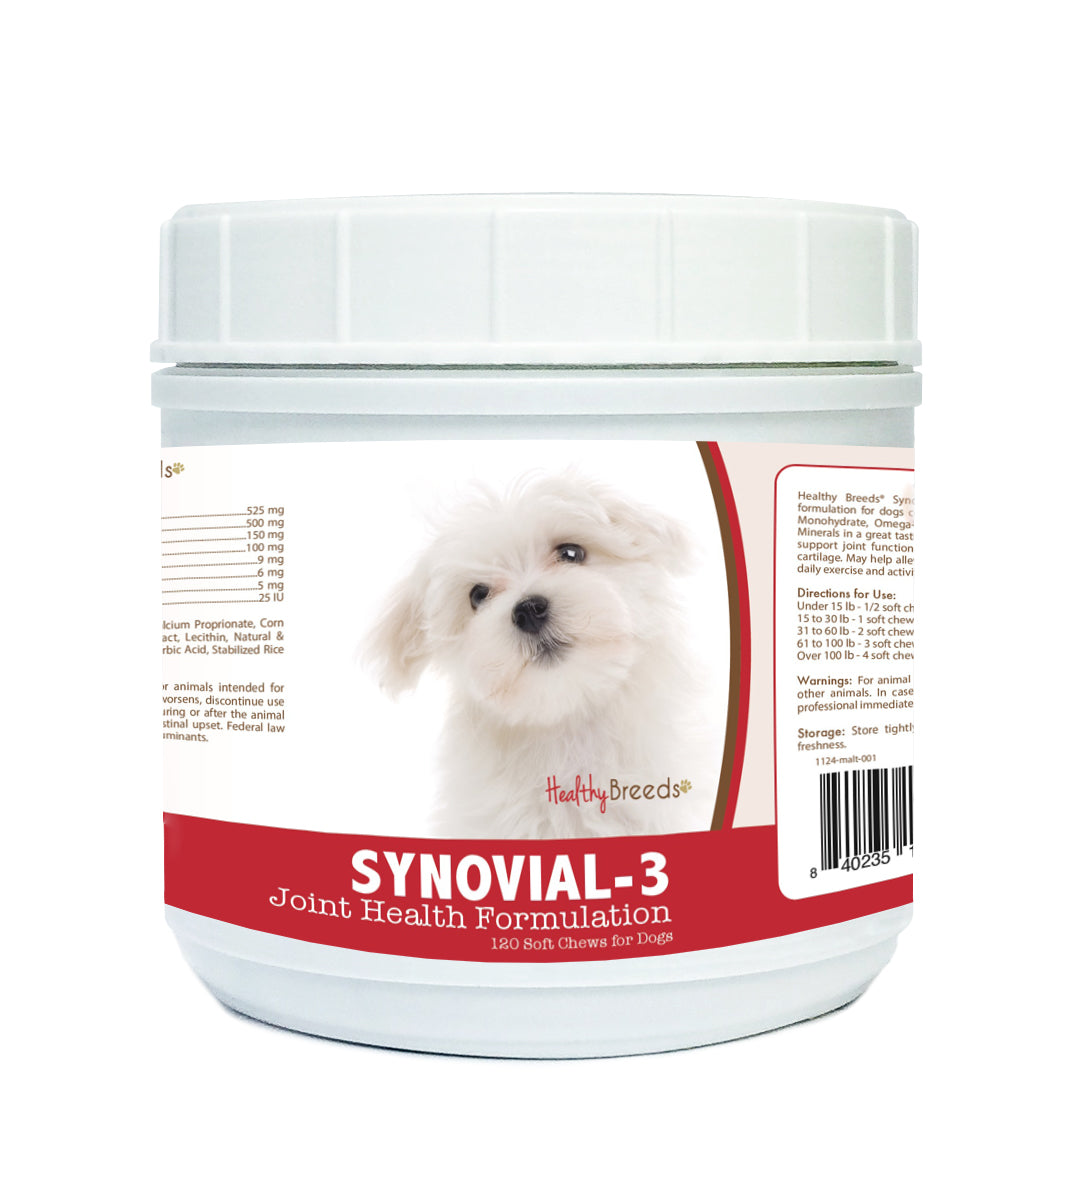 Maltese Synovial-3 Joint Health Formulation Soft Chews 120 Count